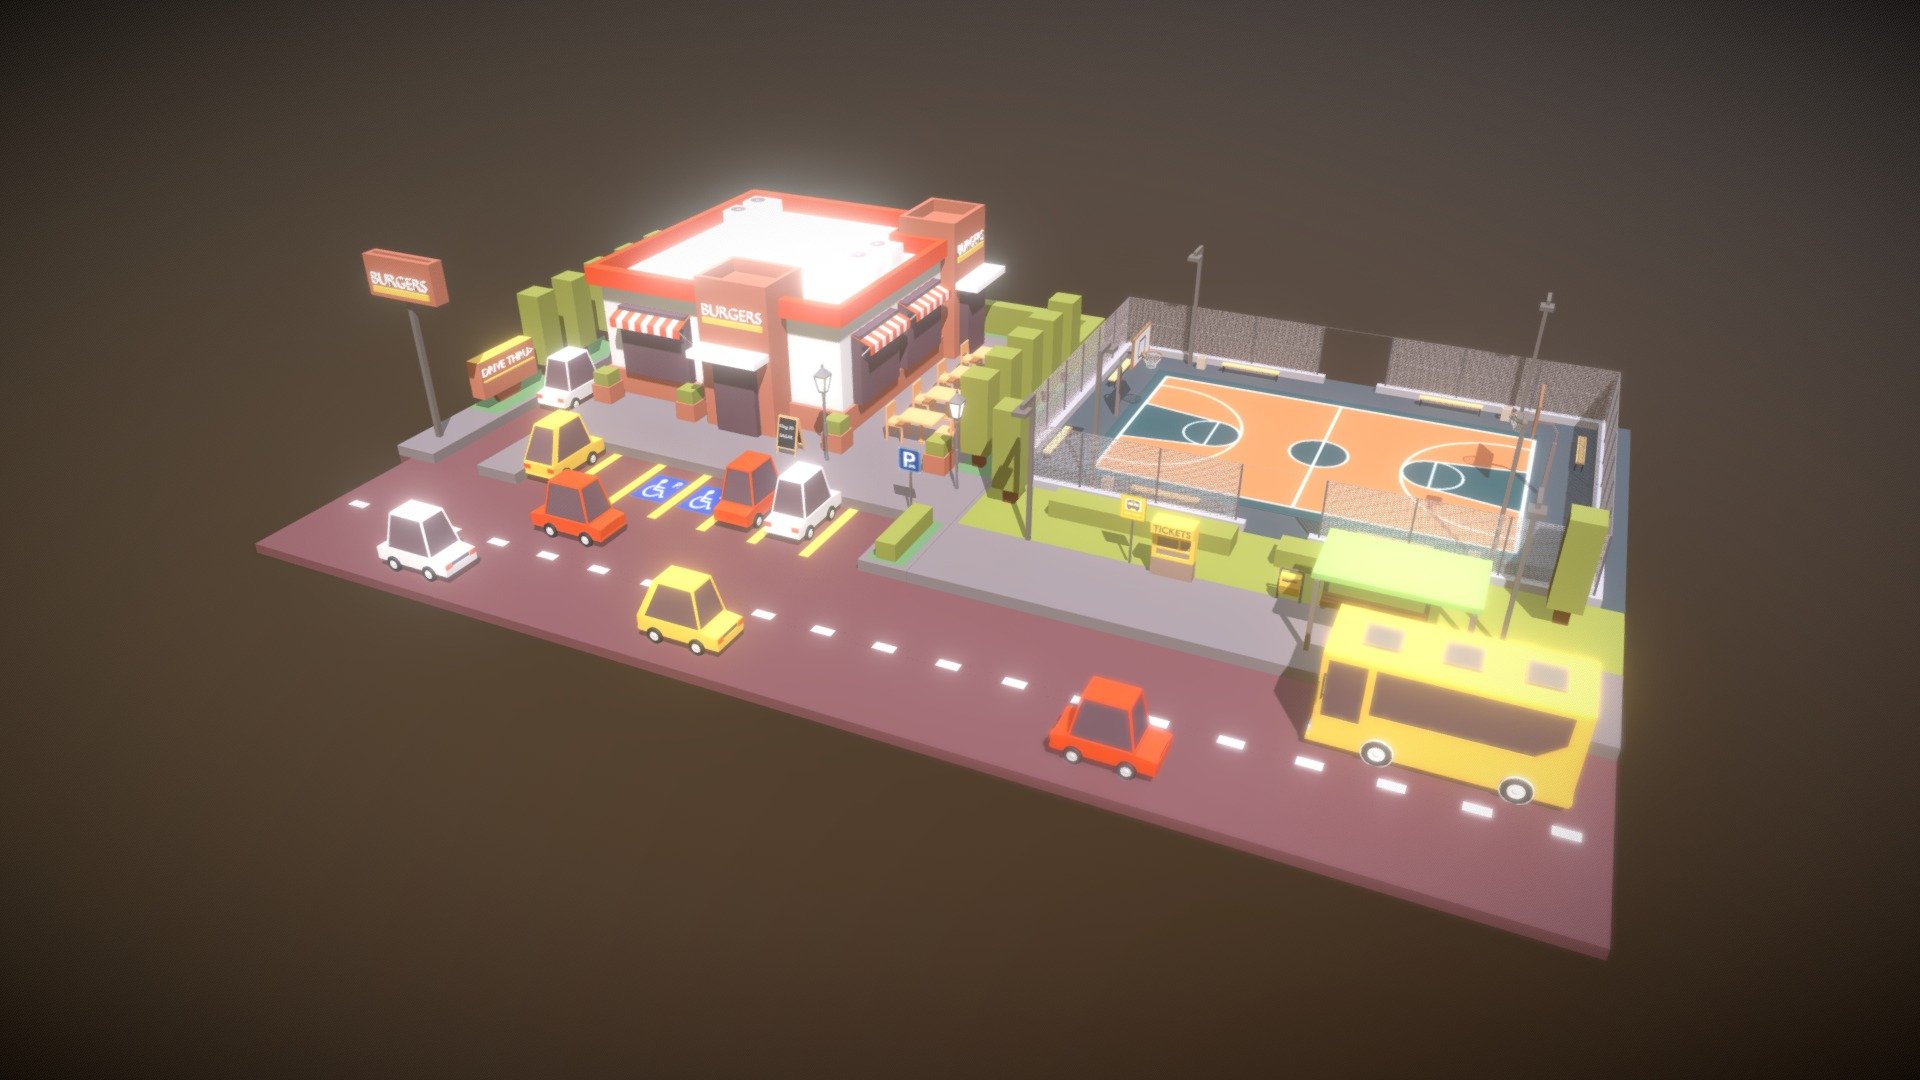 A Low Poly Street idea inspired from images from the internet - Modelled in 3D Blender - Low Poly Street - 3D model by Klieg3D 3d model